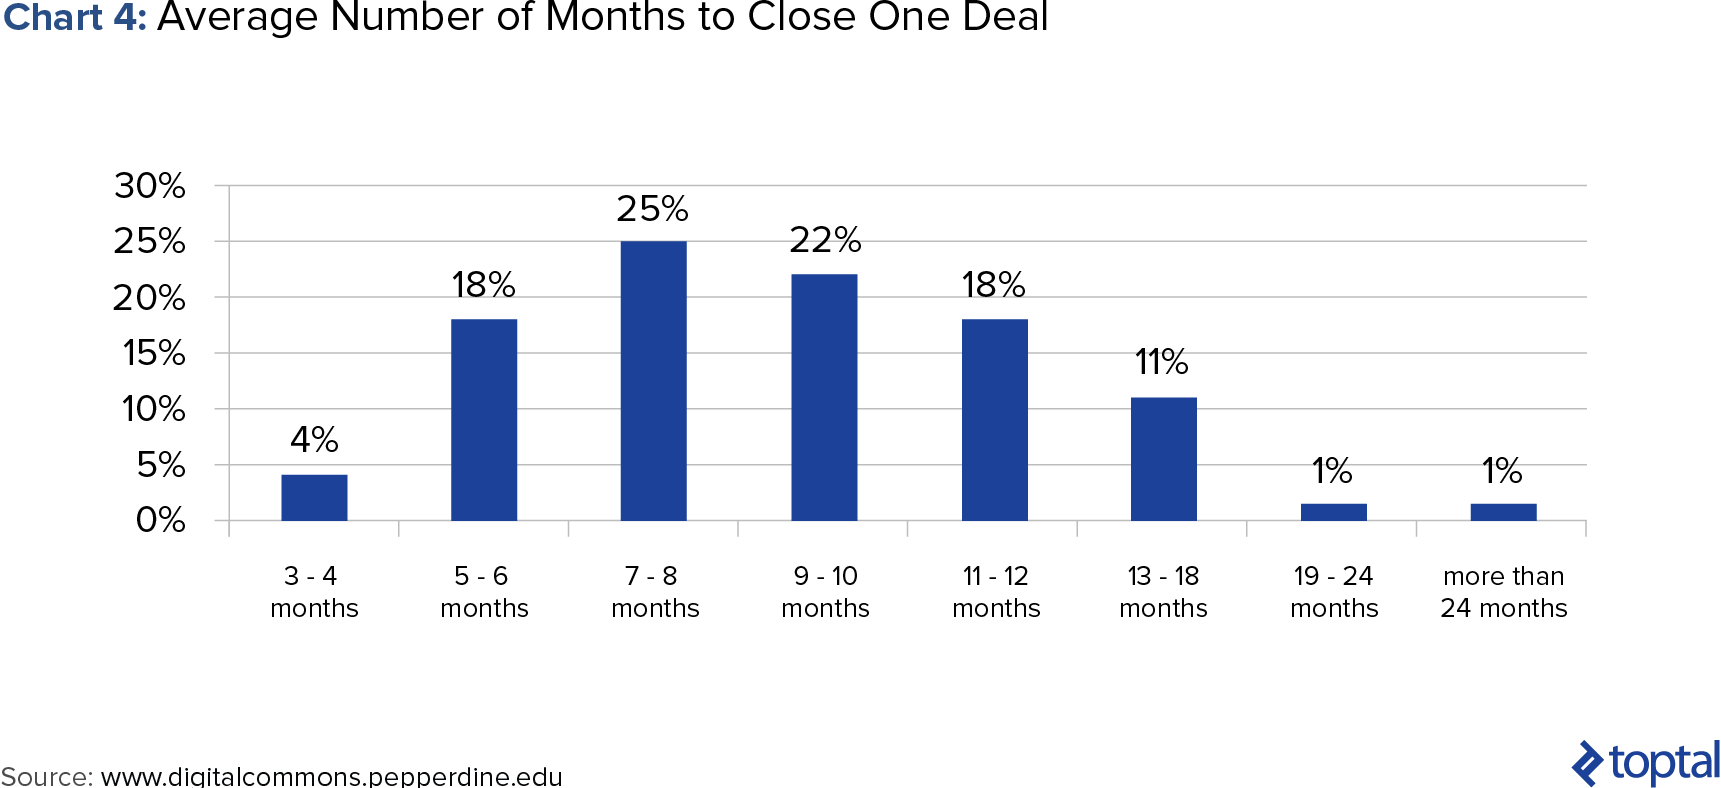 Chart 4: Average Number of Months to Close One Deal